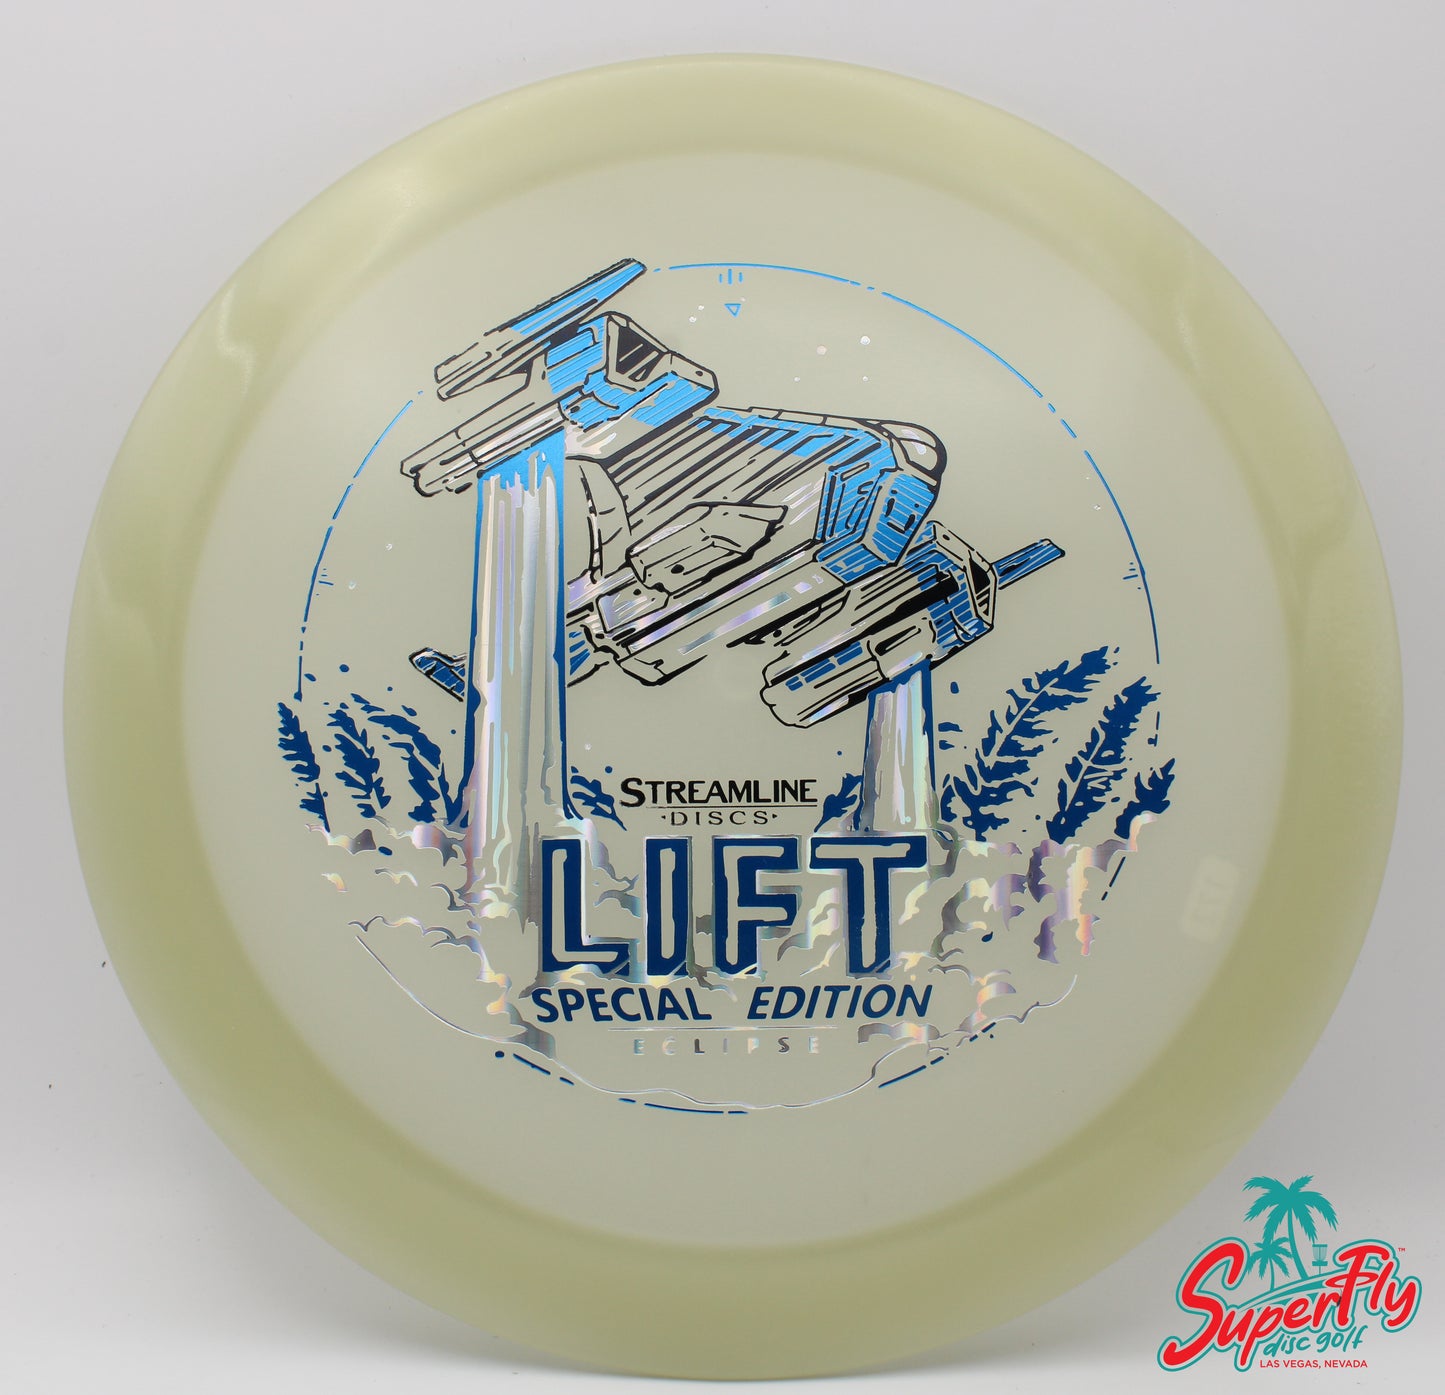 Streamline Discs Special Edition Eclipse 2.0 Lift